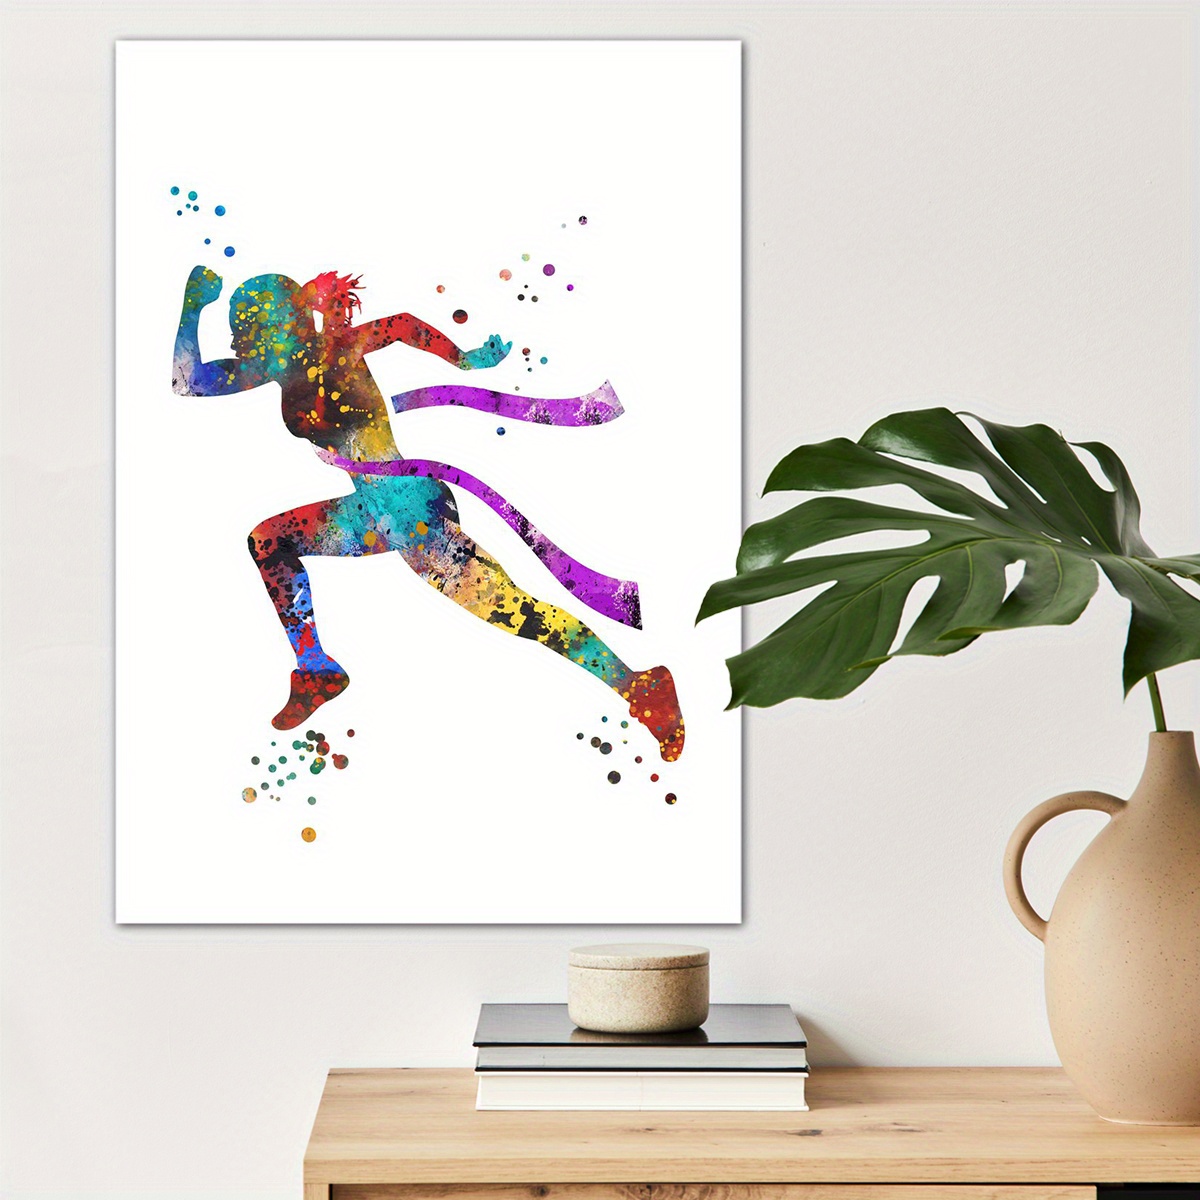 

1pc Running Woman Poster Canvas Wall Art For Home Decor, Sport Lovers Poster Wall Decor High Quality Canvas Prints For Living Room Bedroom Kitchen Office Cafe Decor, Perfect Gift And Decoration